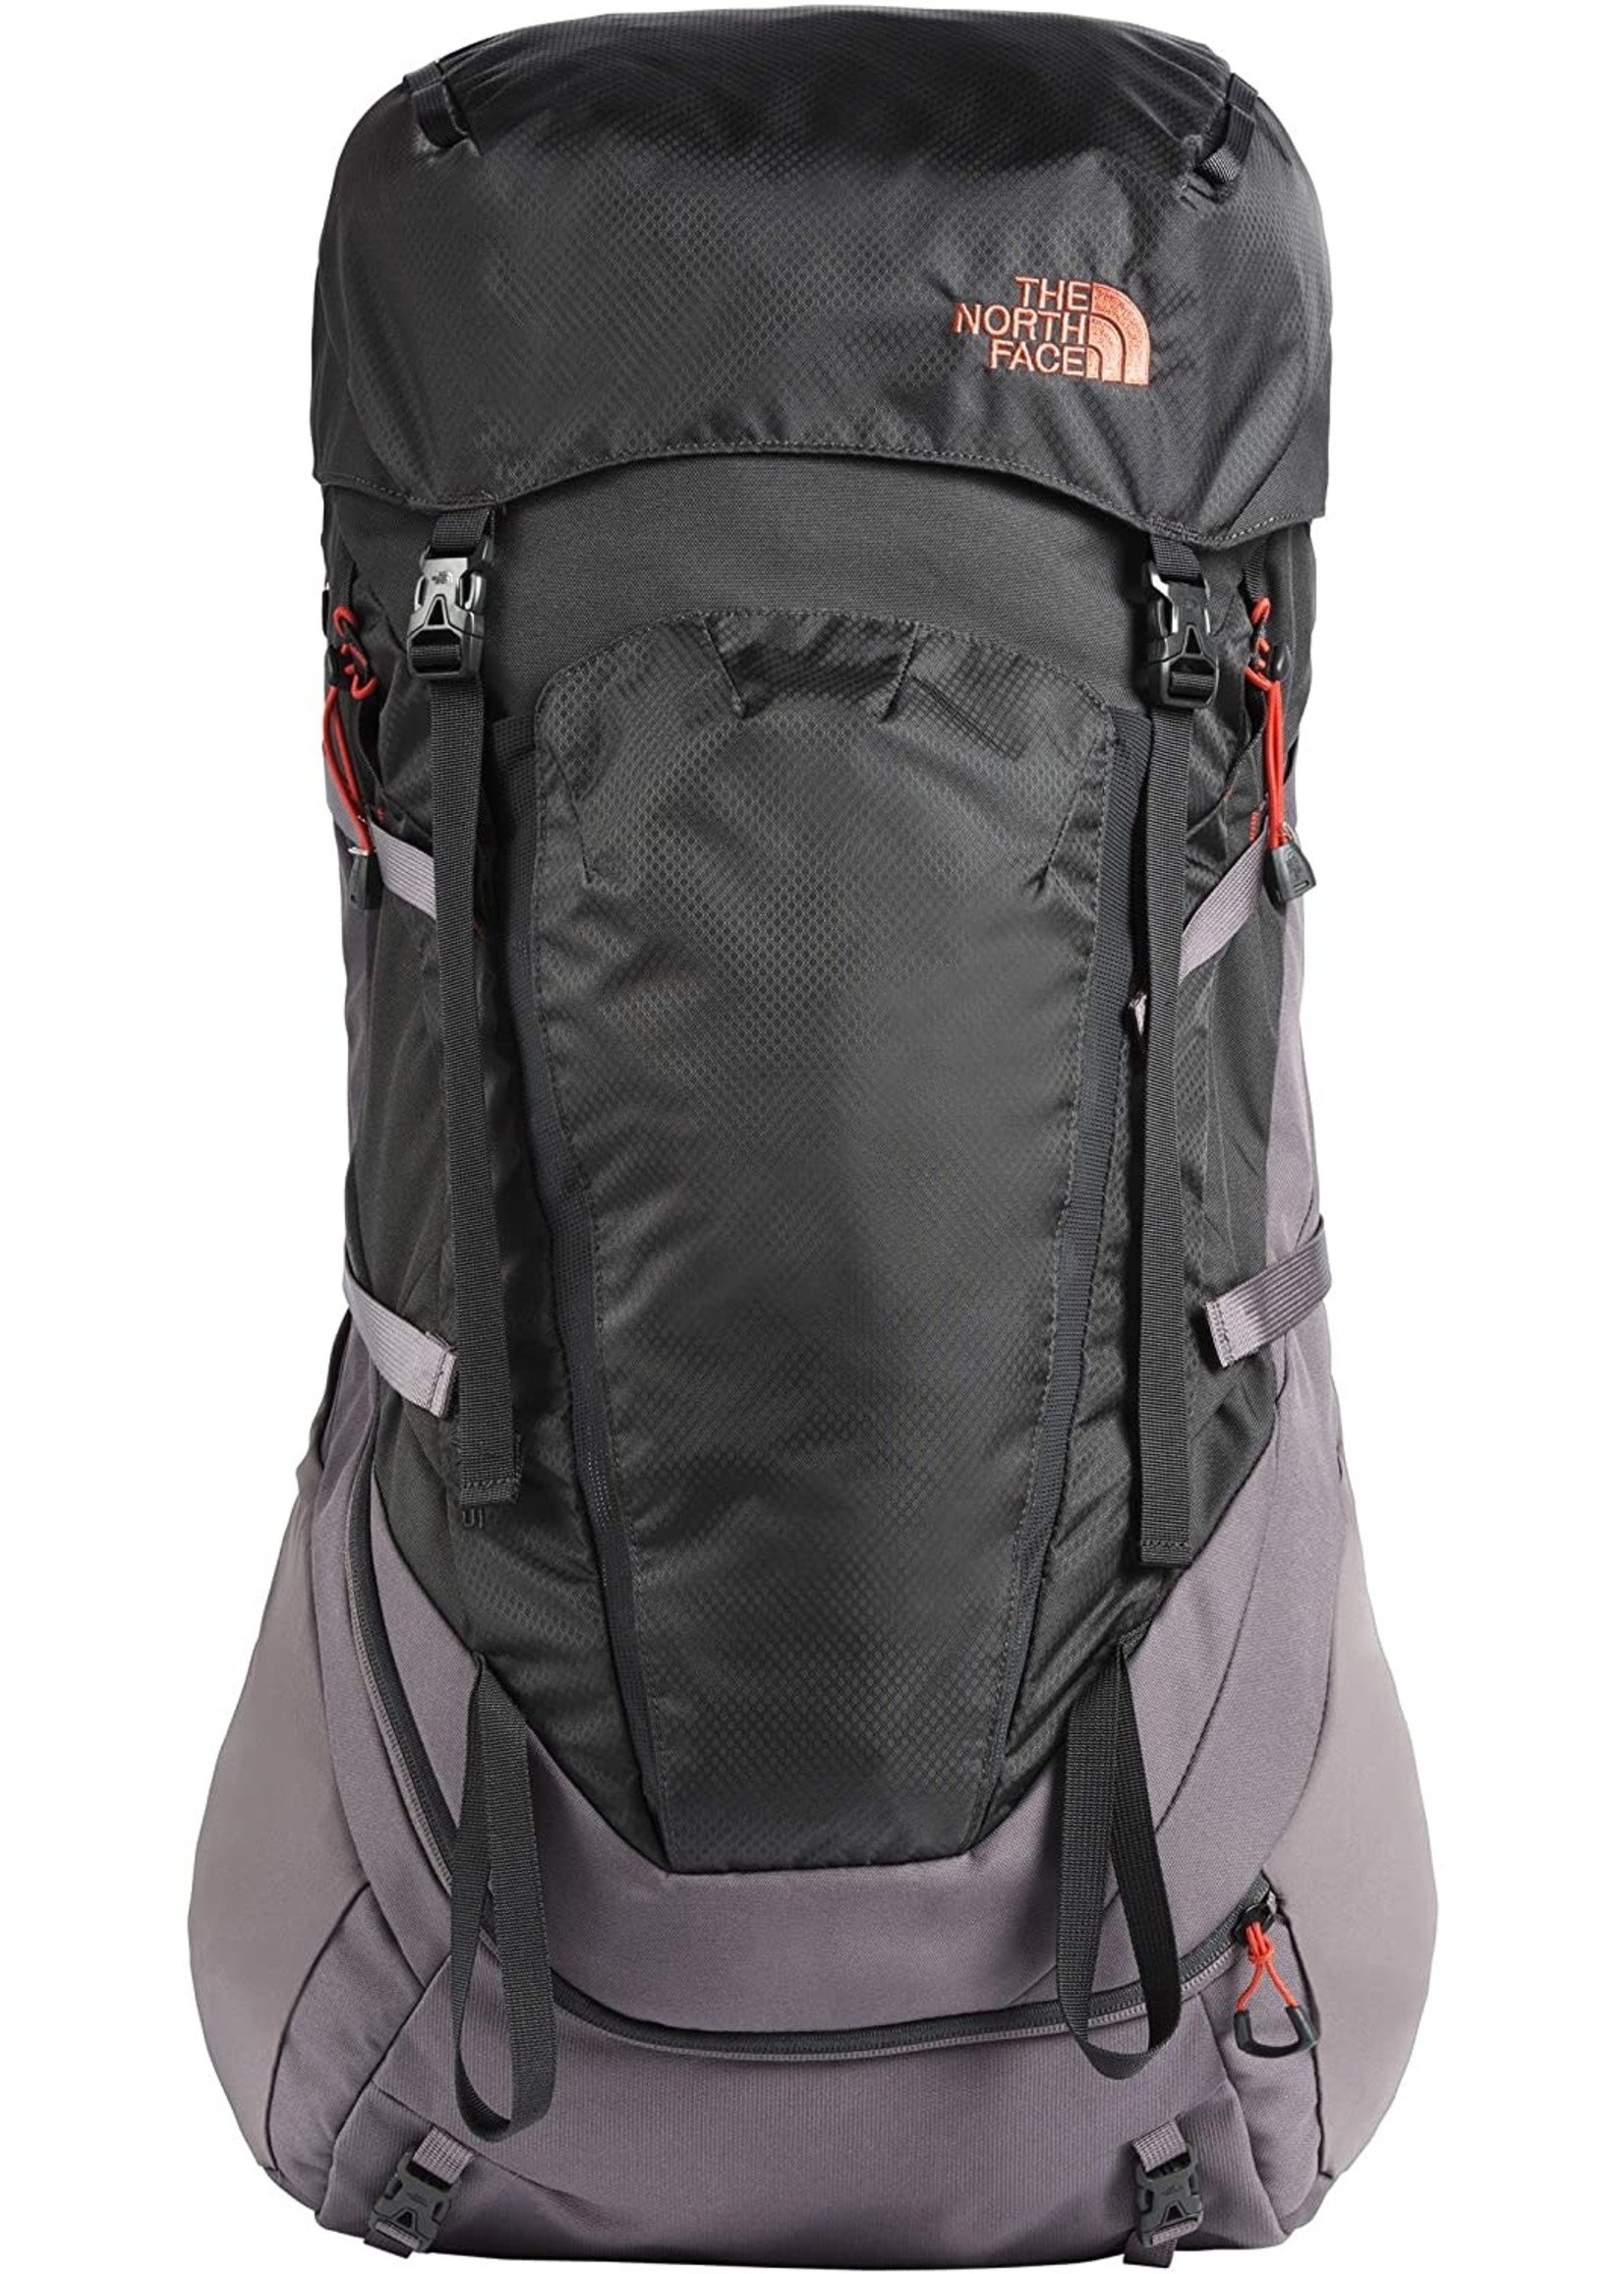 THE NORTH FACE Sac Terra 65 / XS/S / Gris